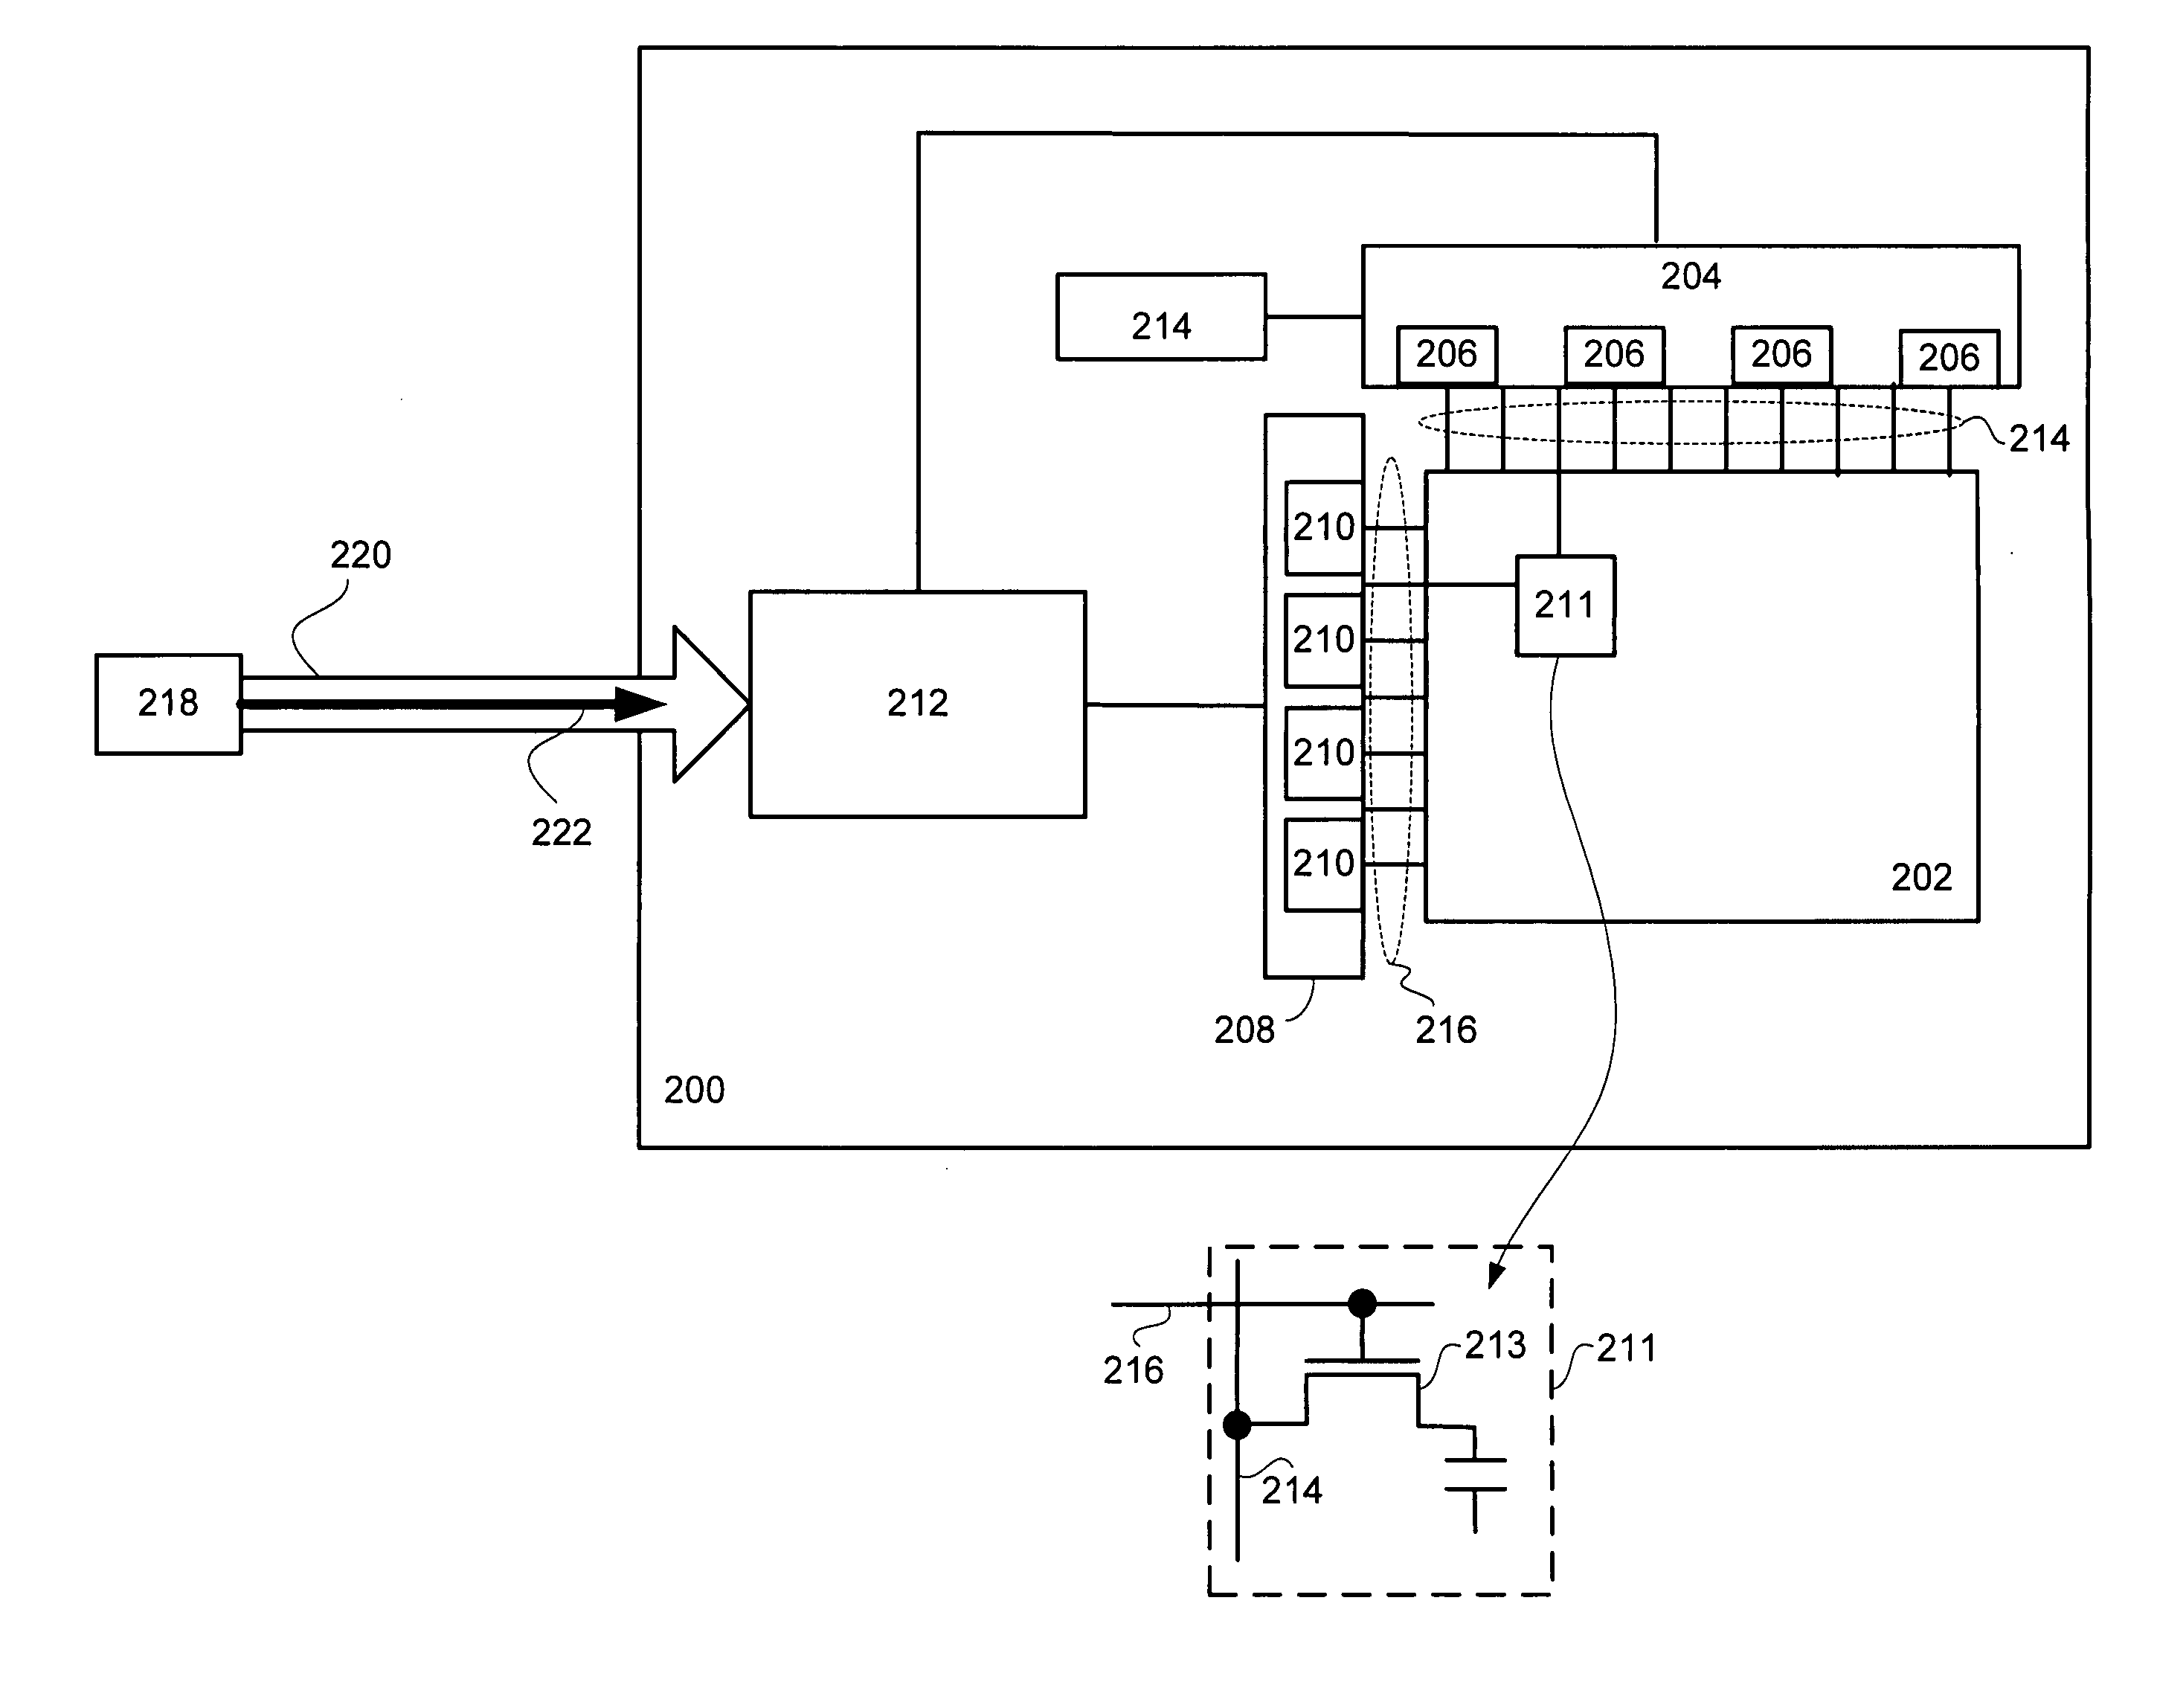 LCD overdrive with data compression for reducing memory bandwidth